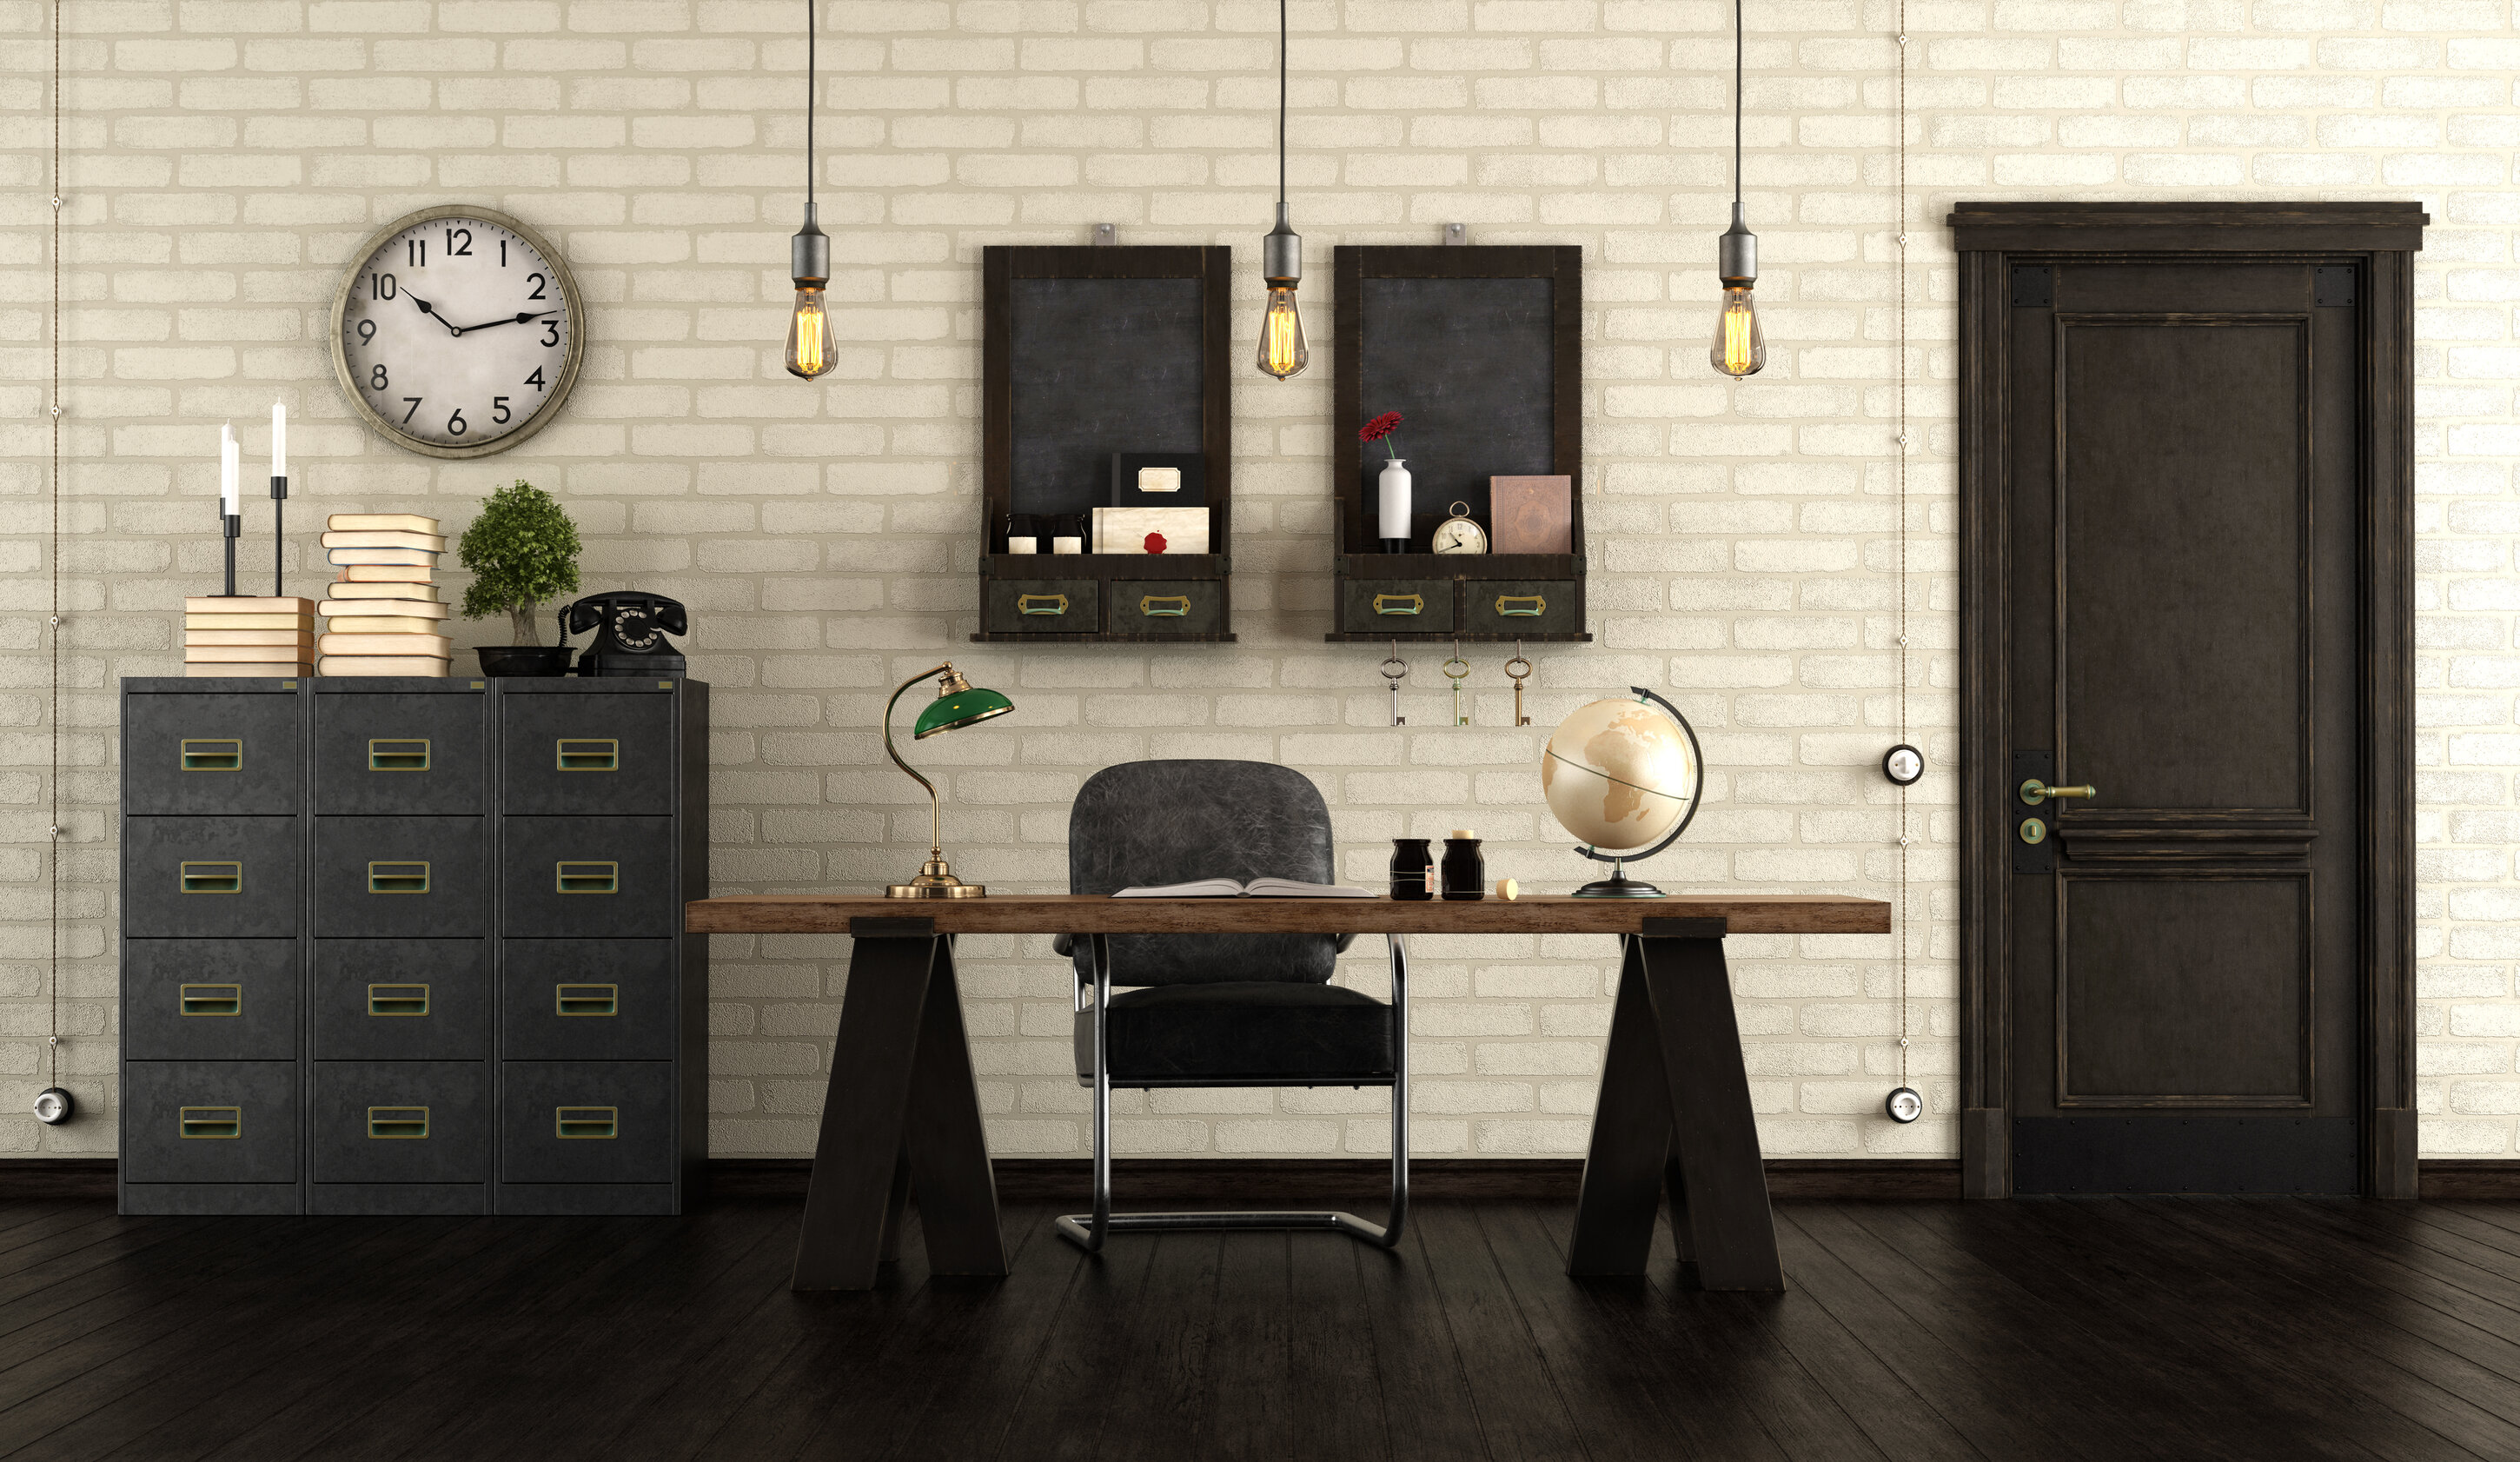 Home Office In Retro Style